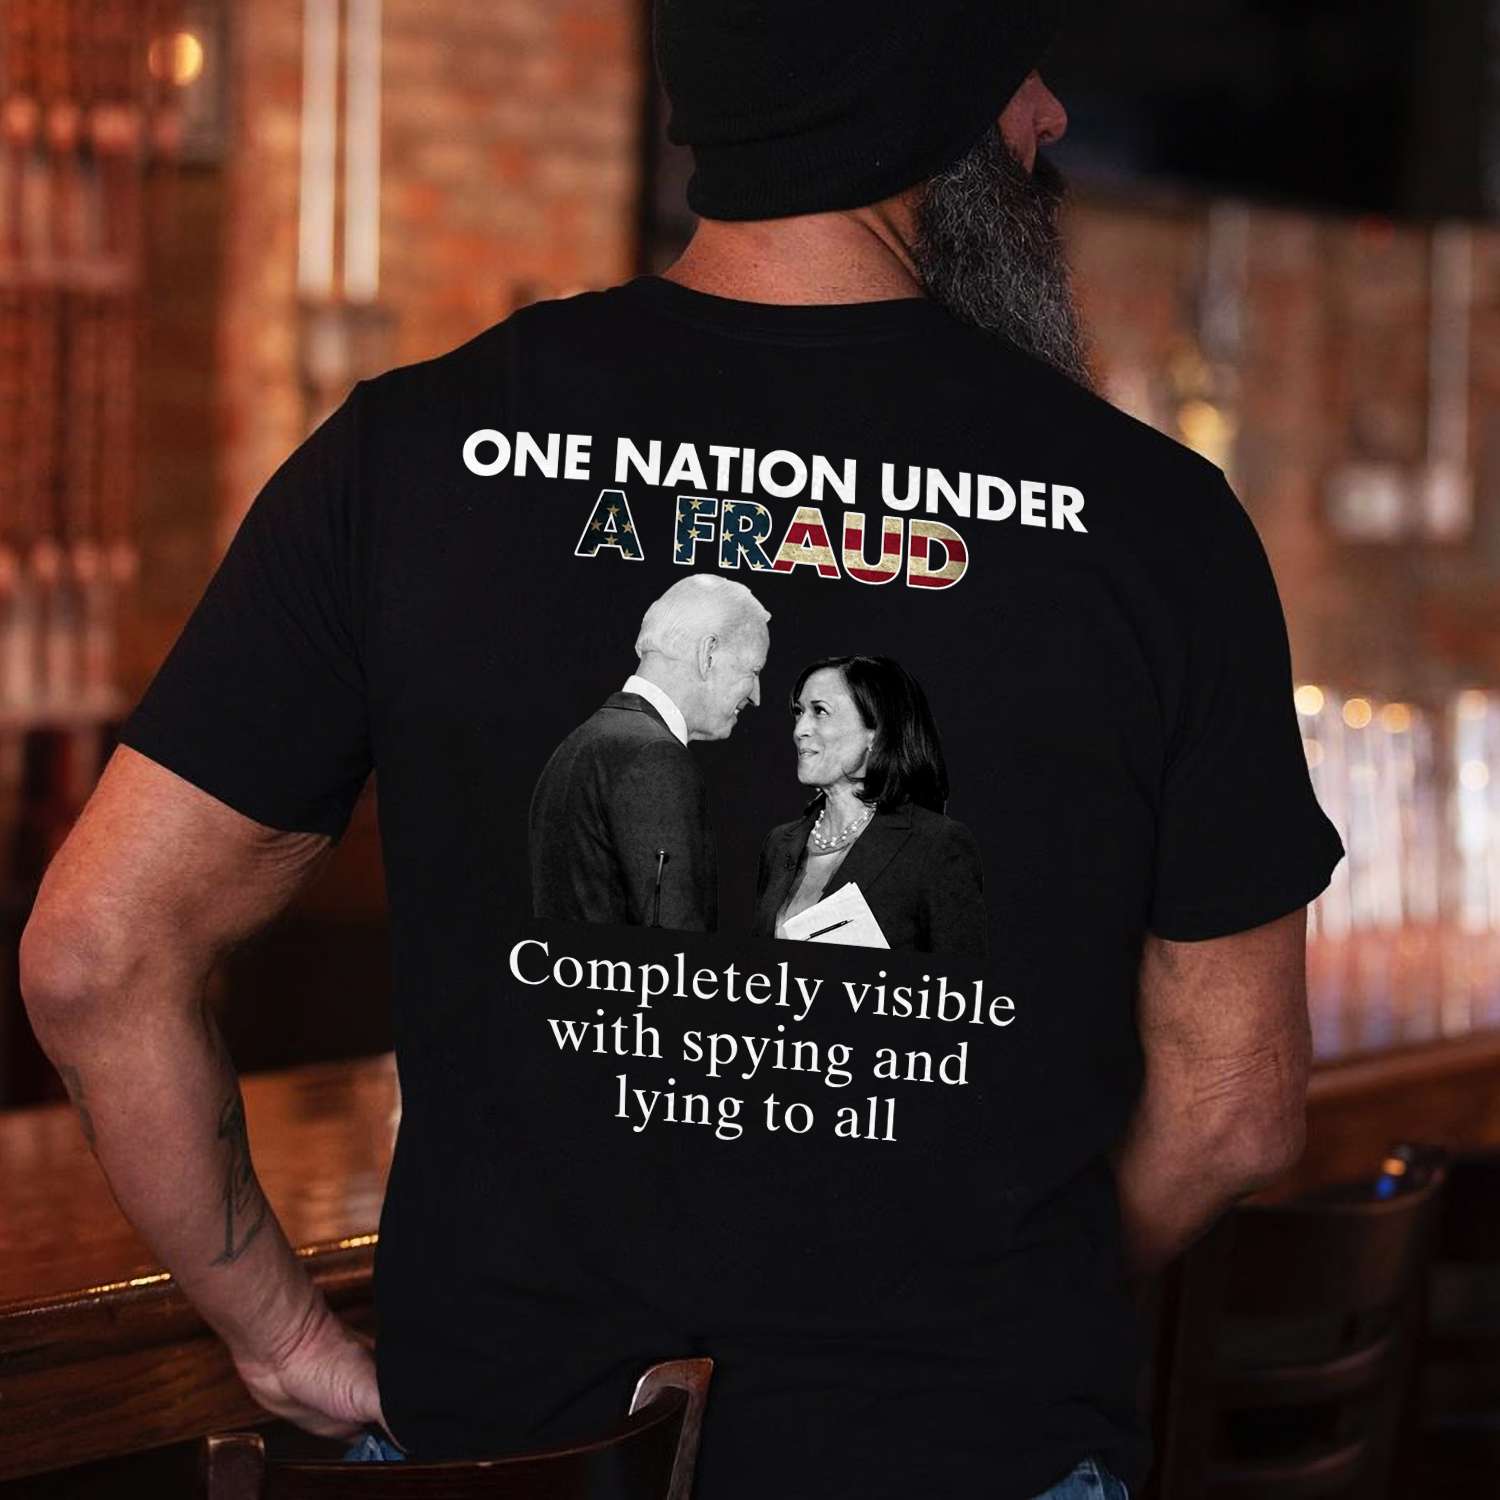 One nation under a fraud - Completely visible with spying and lying to all - Joe Biden and Kamala Harris